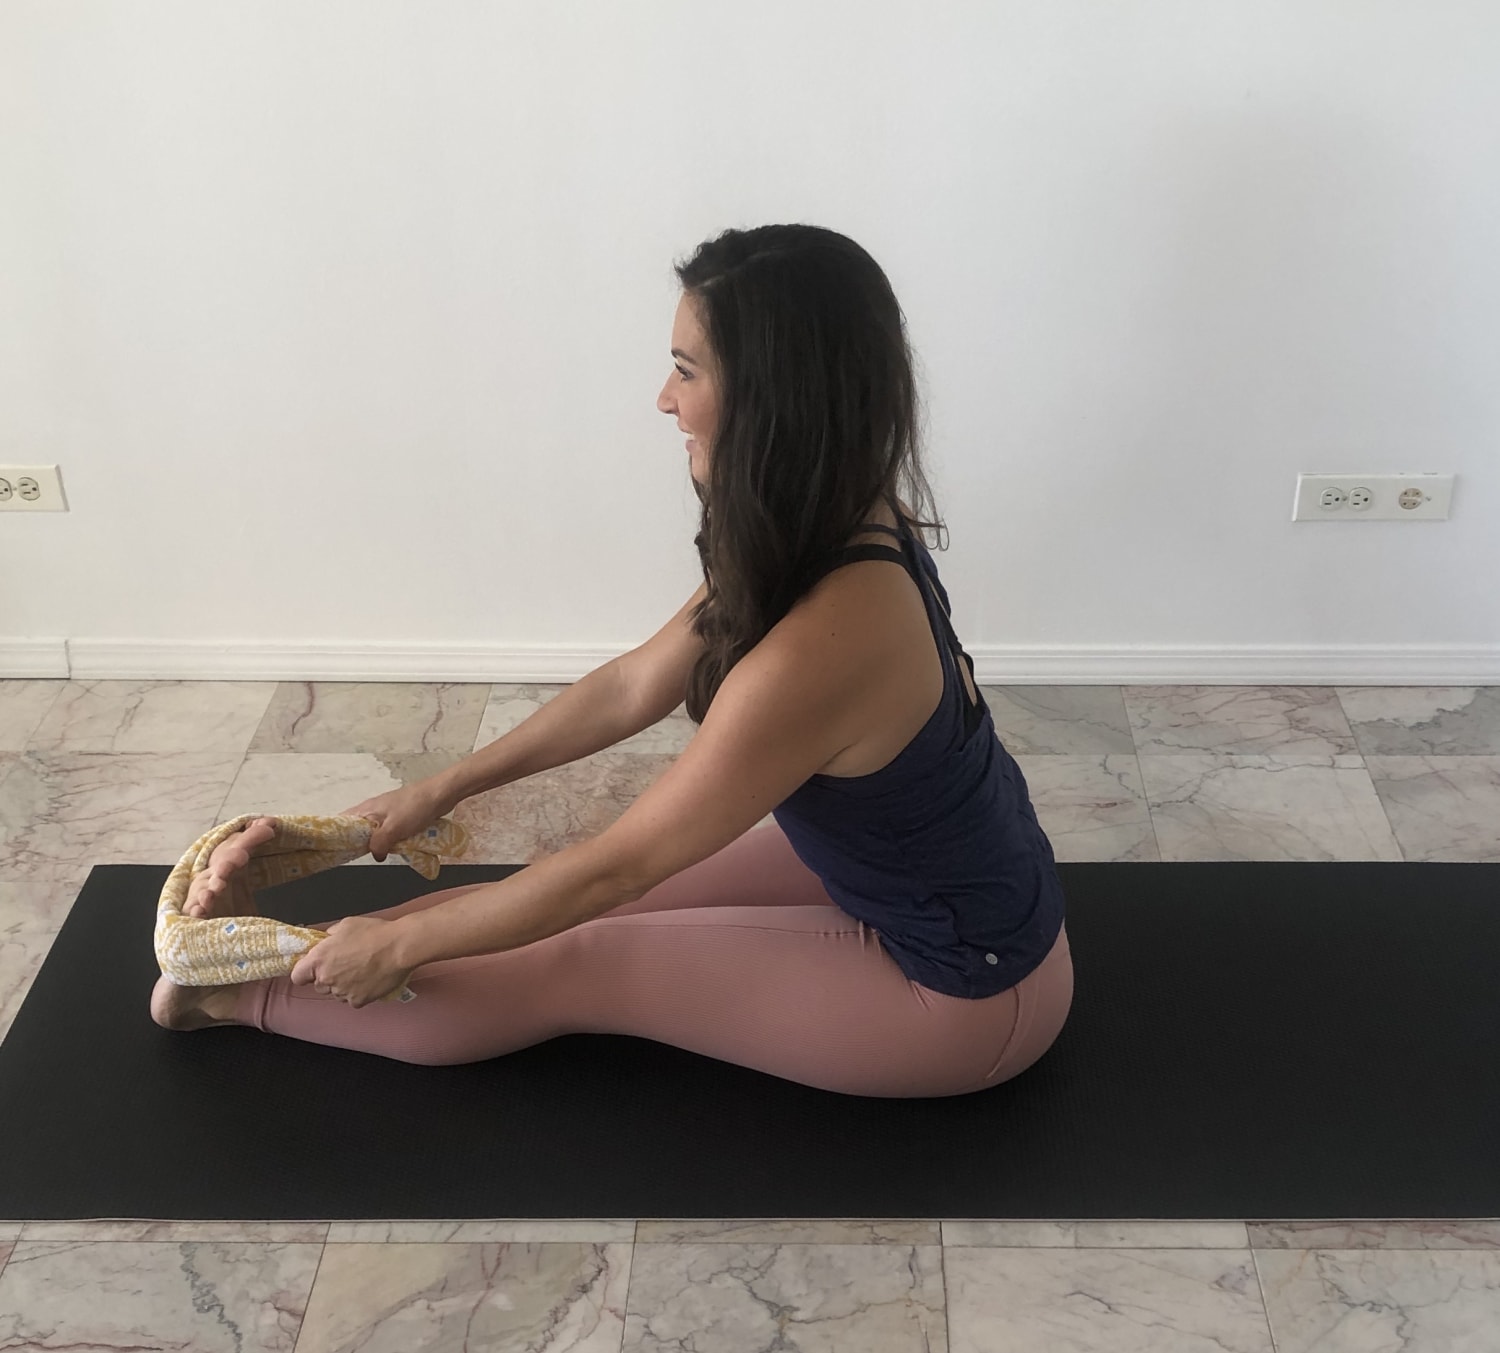 Benefits Of Paschimottanasana (Seated Forward Bend Pose) and How to Do it -  PharmEasy Blog